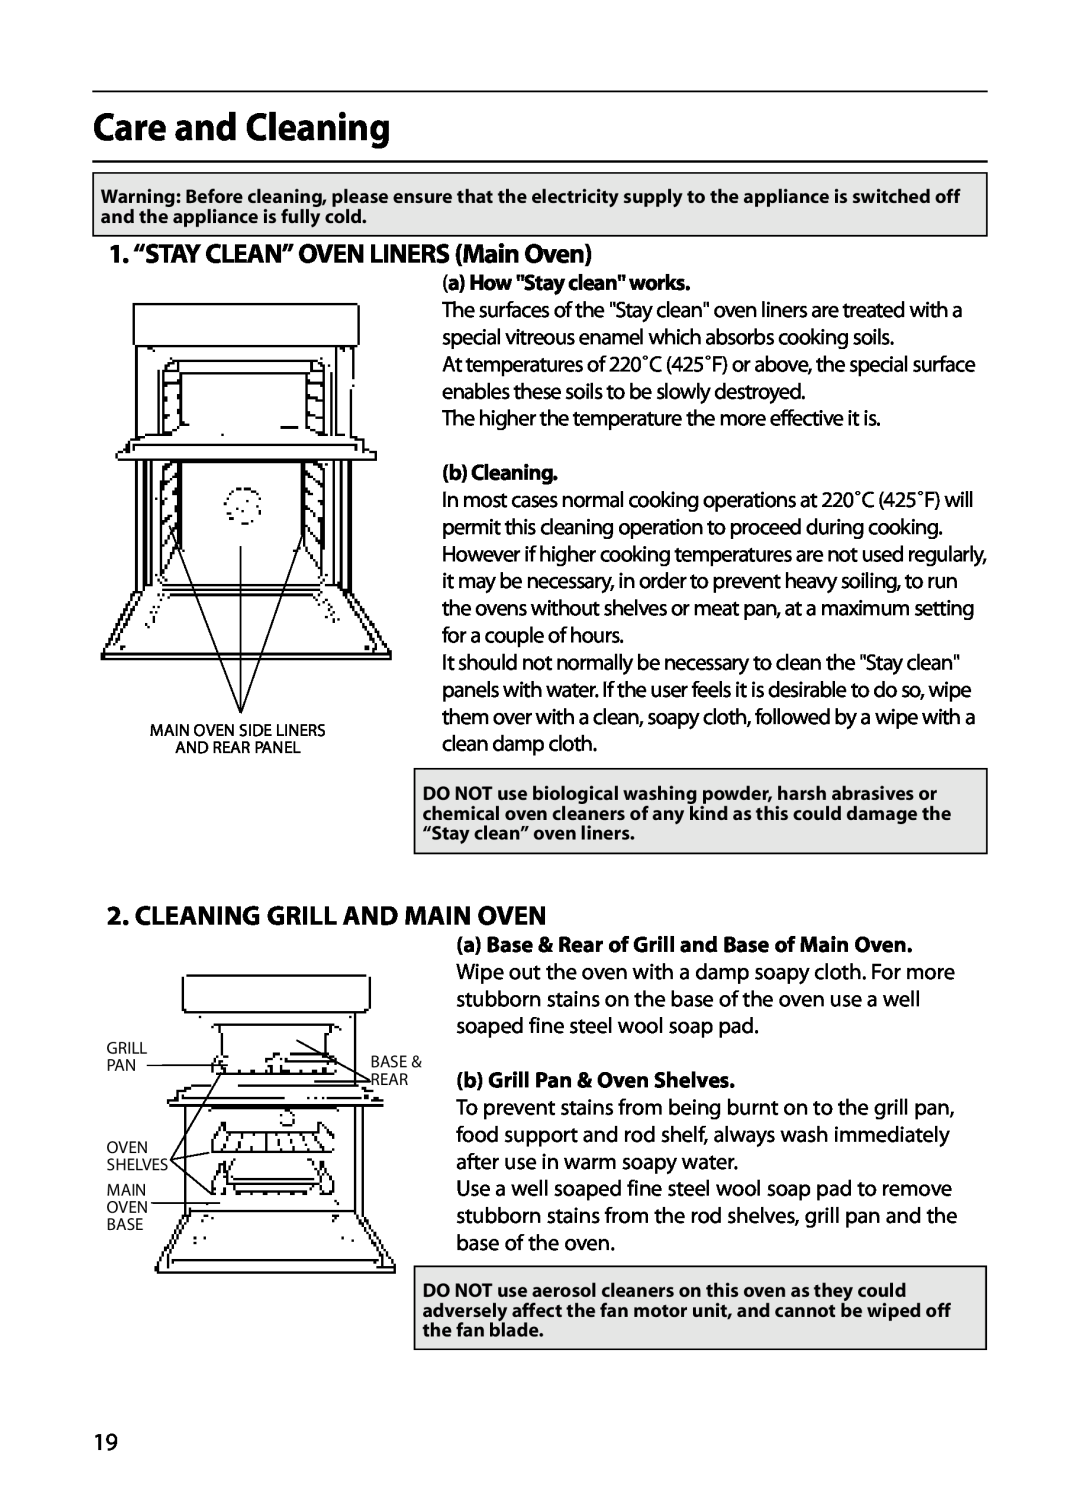 Hotpoint S220E manual Care and Cleaning, 1. “STAY CLEAN” OVEN LINERS Main Oven, Cleaning Grill And Main Oven, b Cleaning 